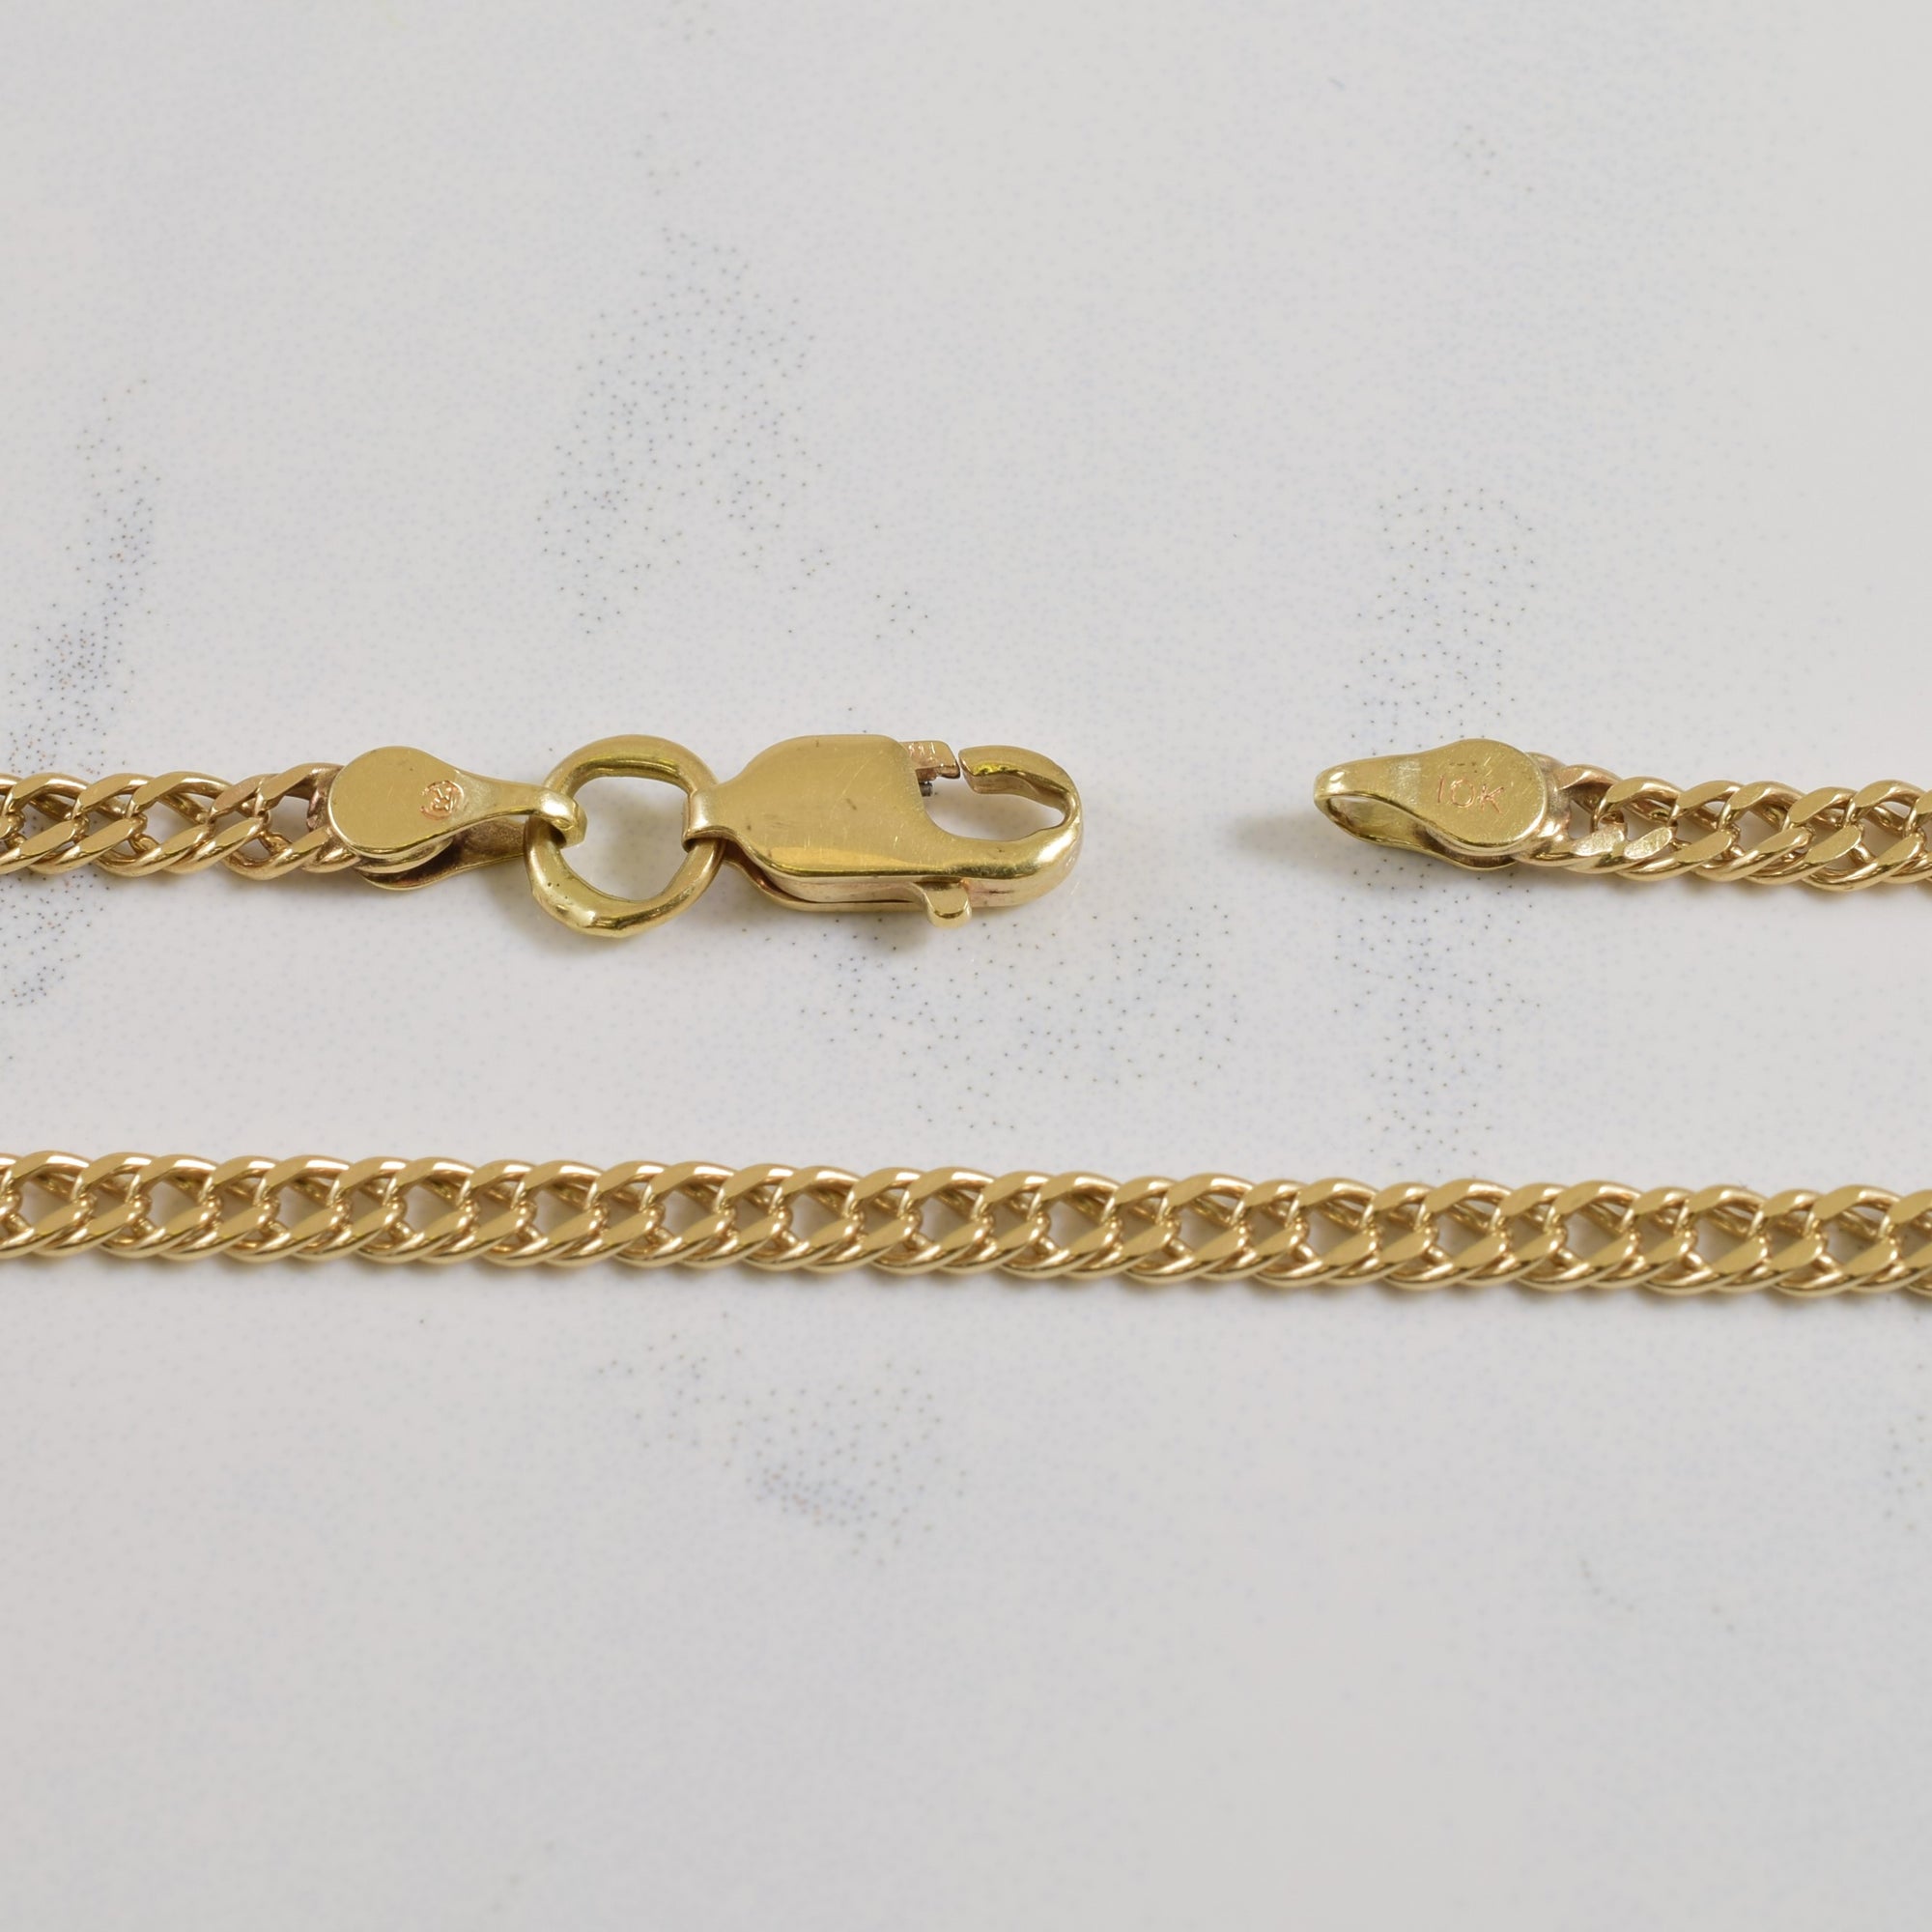 10k Yellow Gold Double Link Chain | 23.5